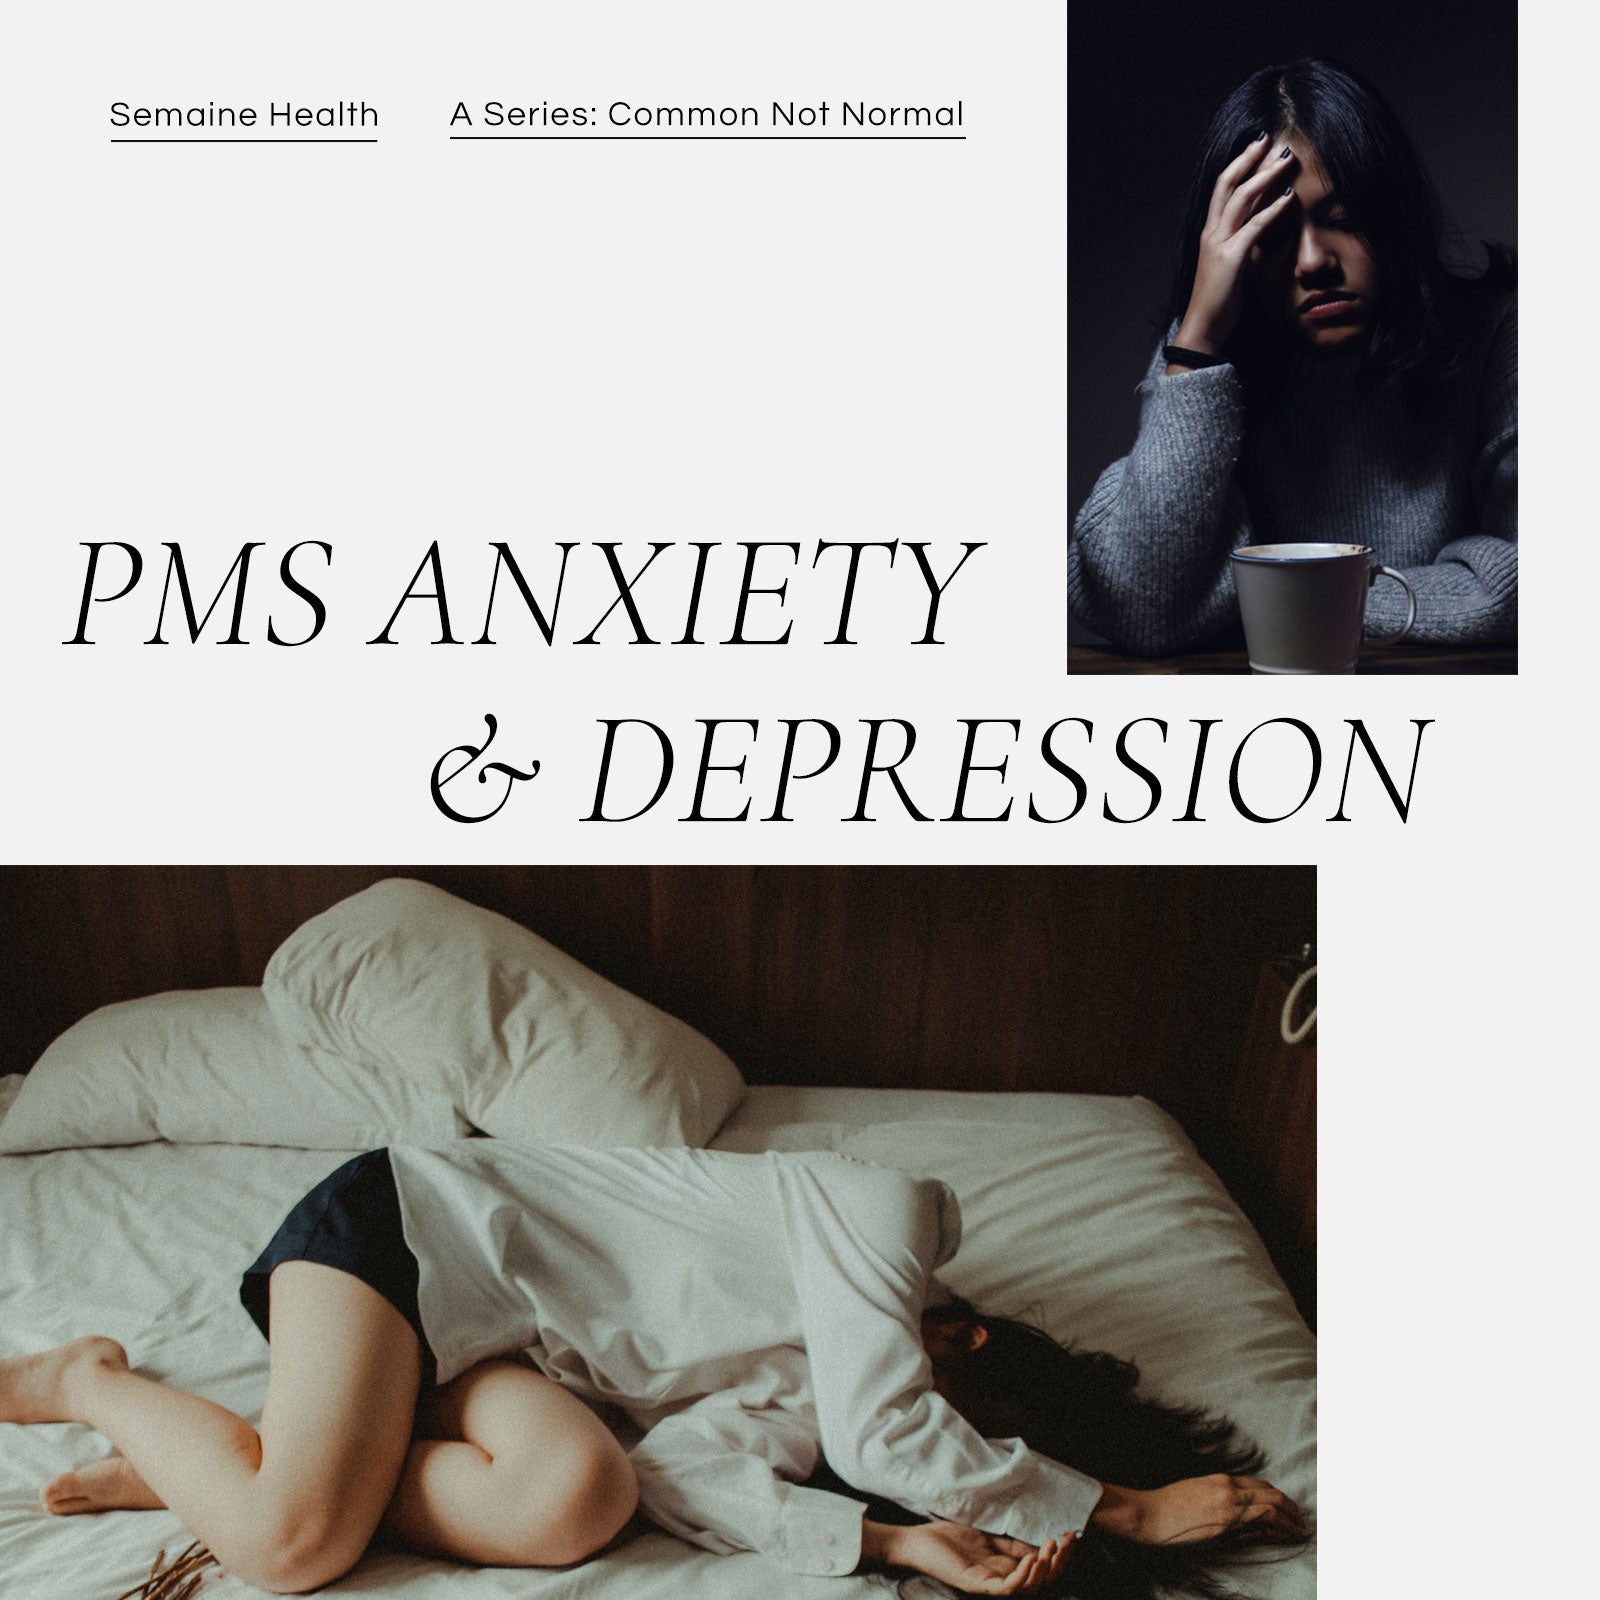 PMS Anxiety and Depression: Common or Normal? – Semaine Health